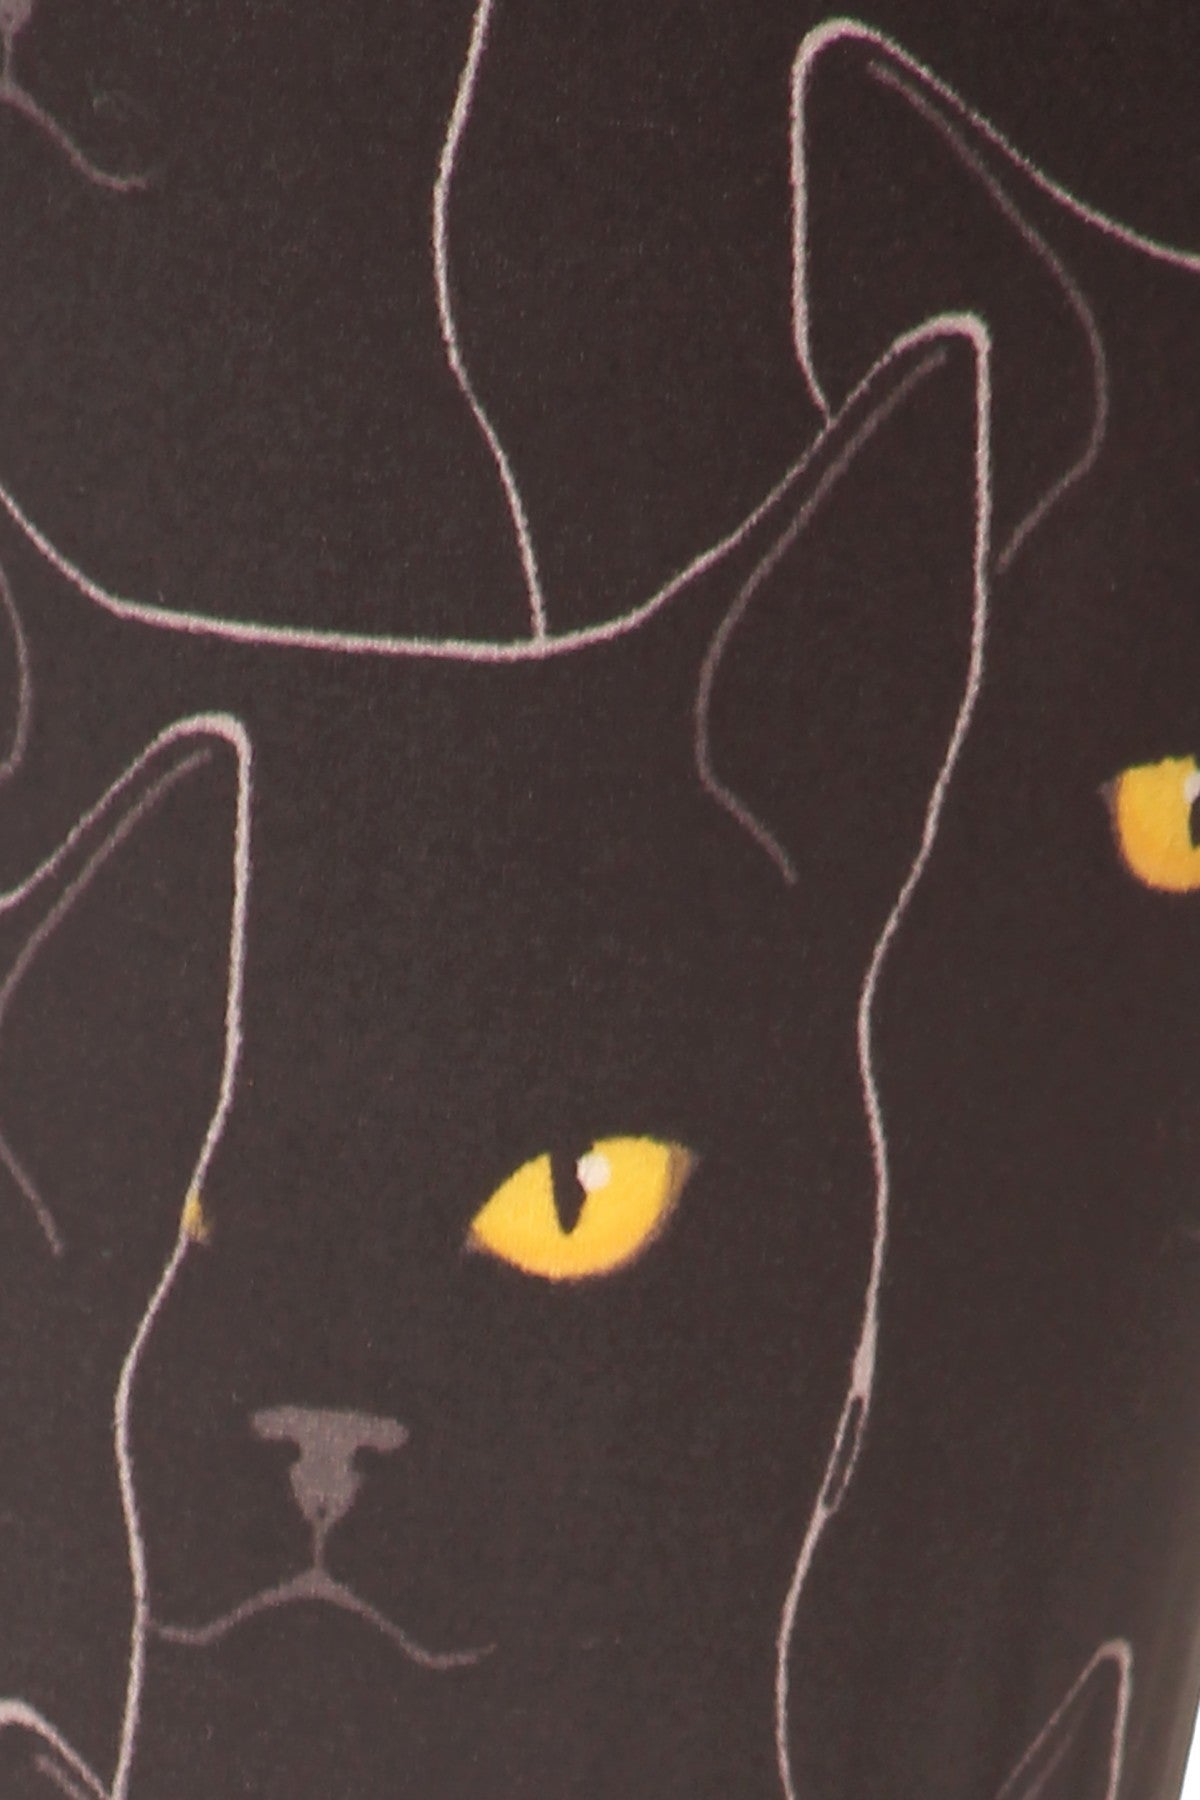 Black Cats Printed, High Waisted Leggings In A Fit Style, With An Elastic Waistband - Fashion Quality Boutik